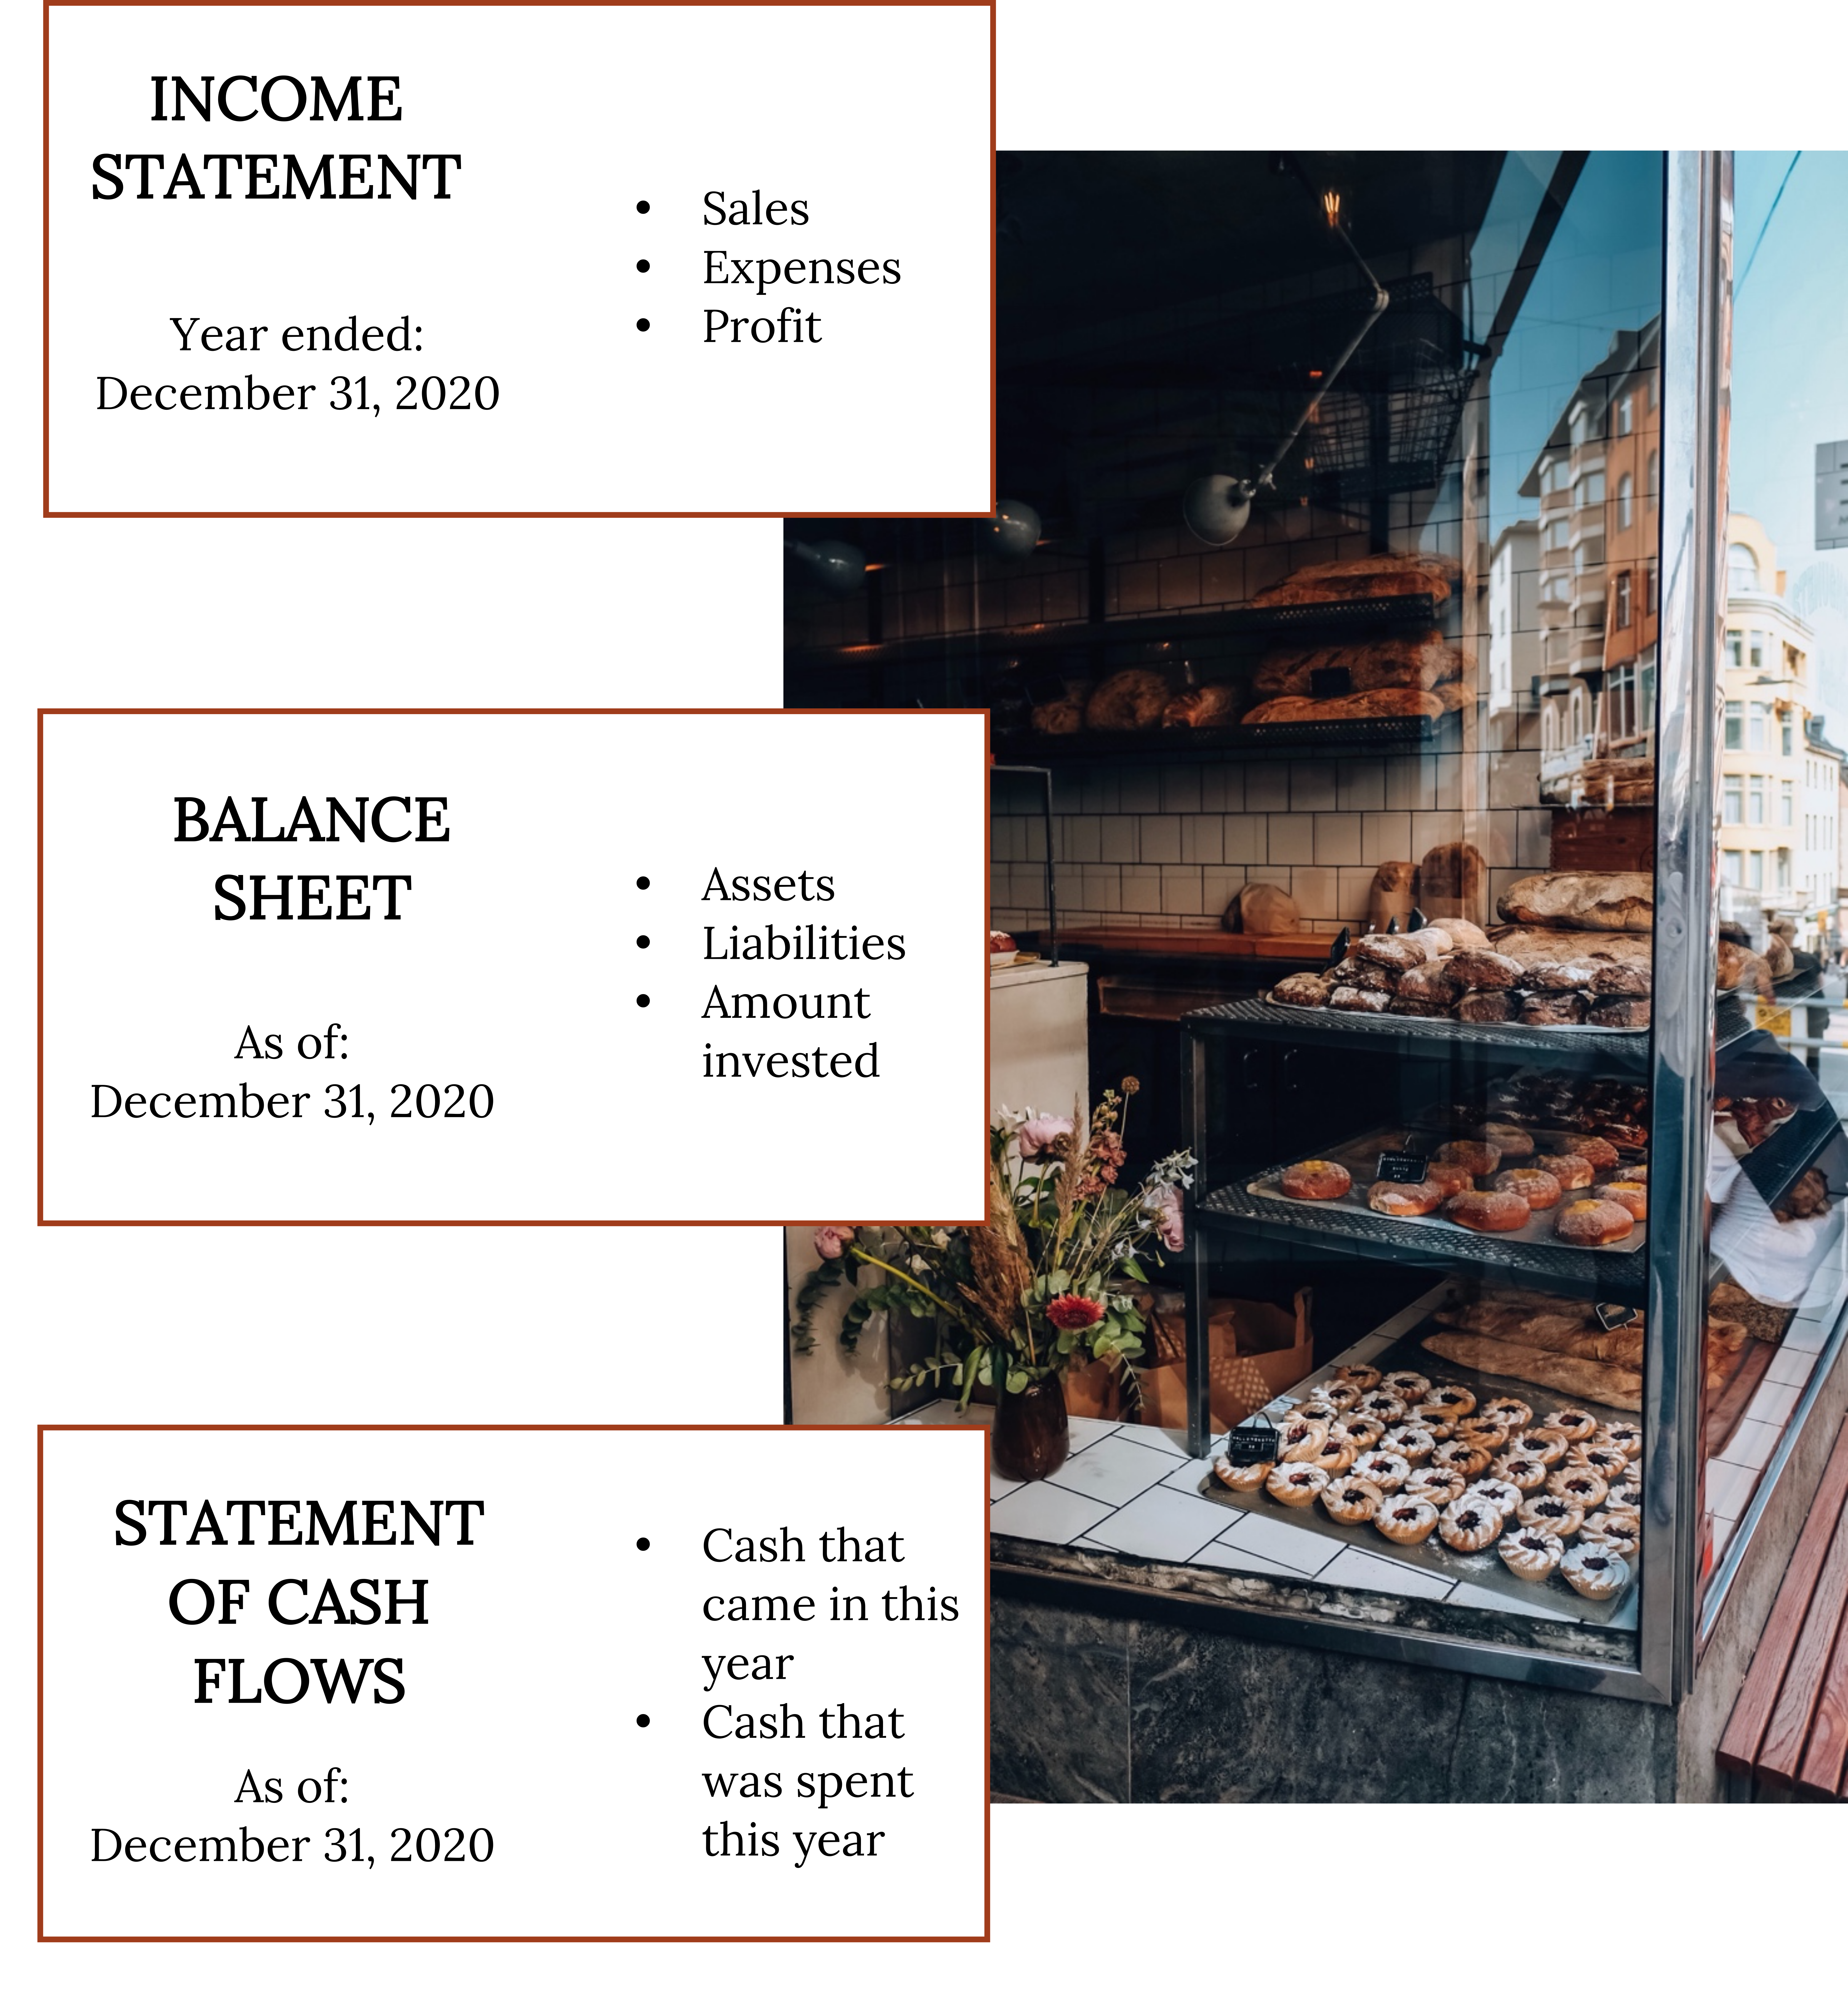 A representation of financial statements. A bakery sits at the side of the graphic. There are three financial statements beside it. The first statement reads: Income Statement, Year ended: December 31, 2020, Sales, Expenses, Profit. The second statement reads: Balance Sheet, As of: December 31, 2020, Assets, Liabilities, Amount invested. The third statement reads: Statement of Cash Flows, As of: December 31, 2020, Cash that came in this year, Cash that was spent this year